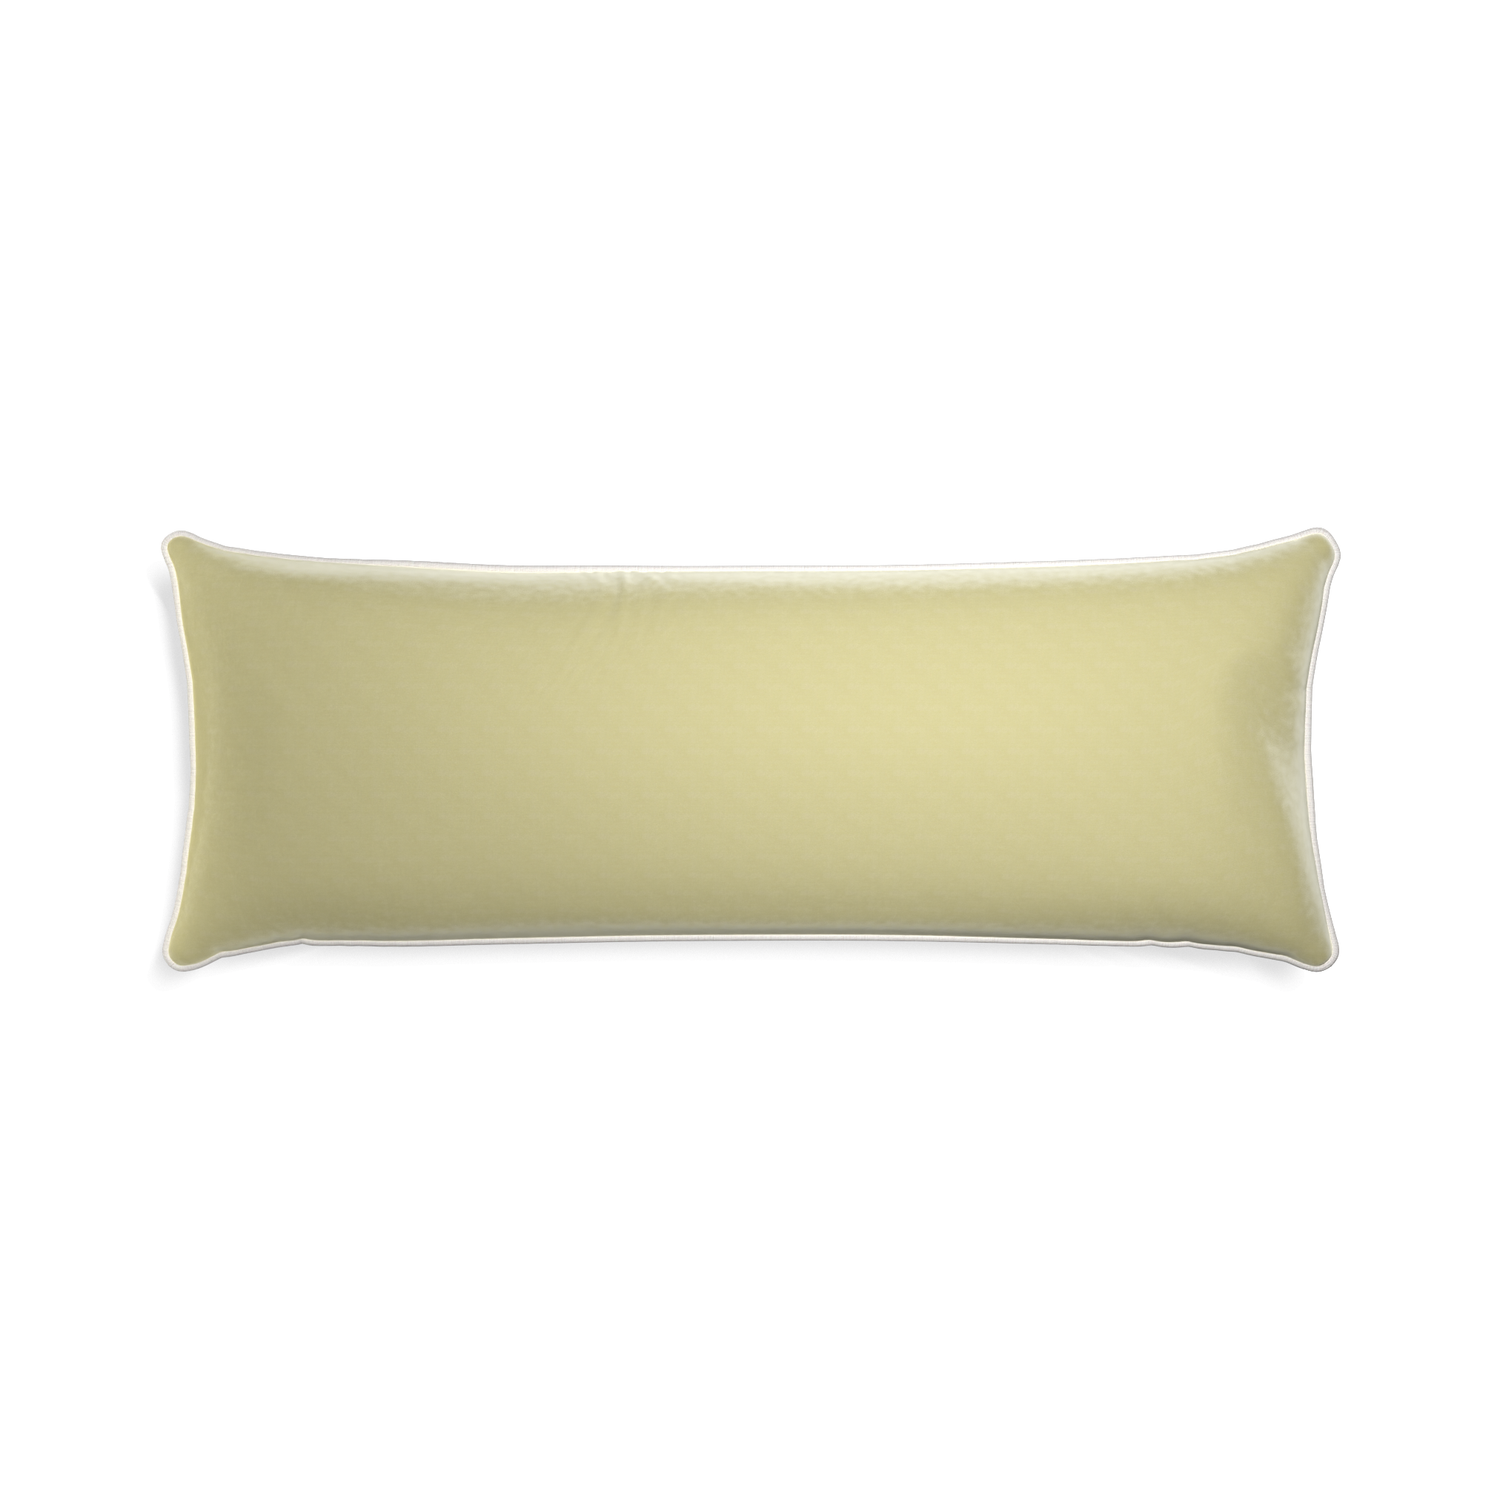 Xl-lumbar pear velvet custom light greenpillow with snow piping on white background